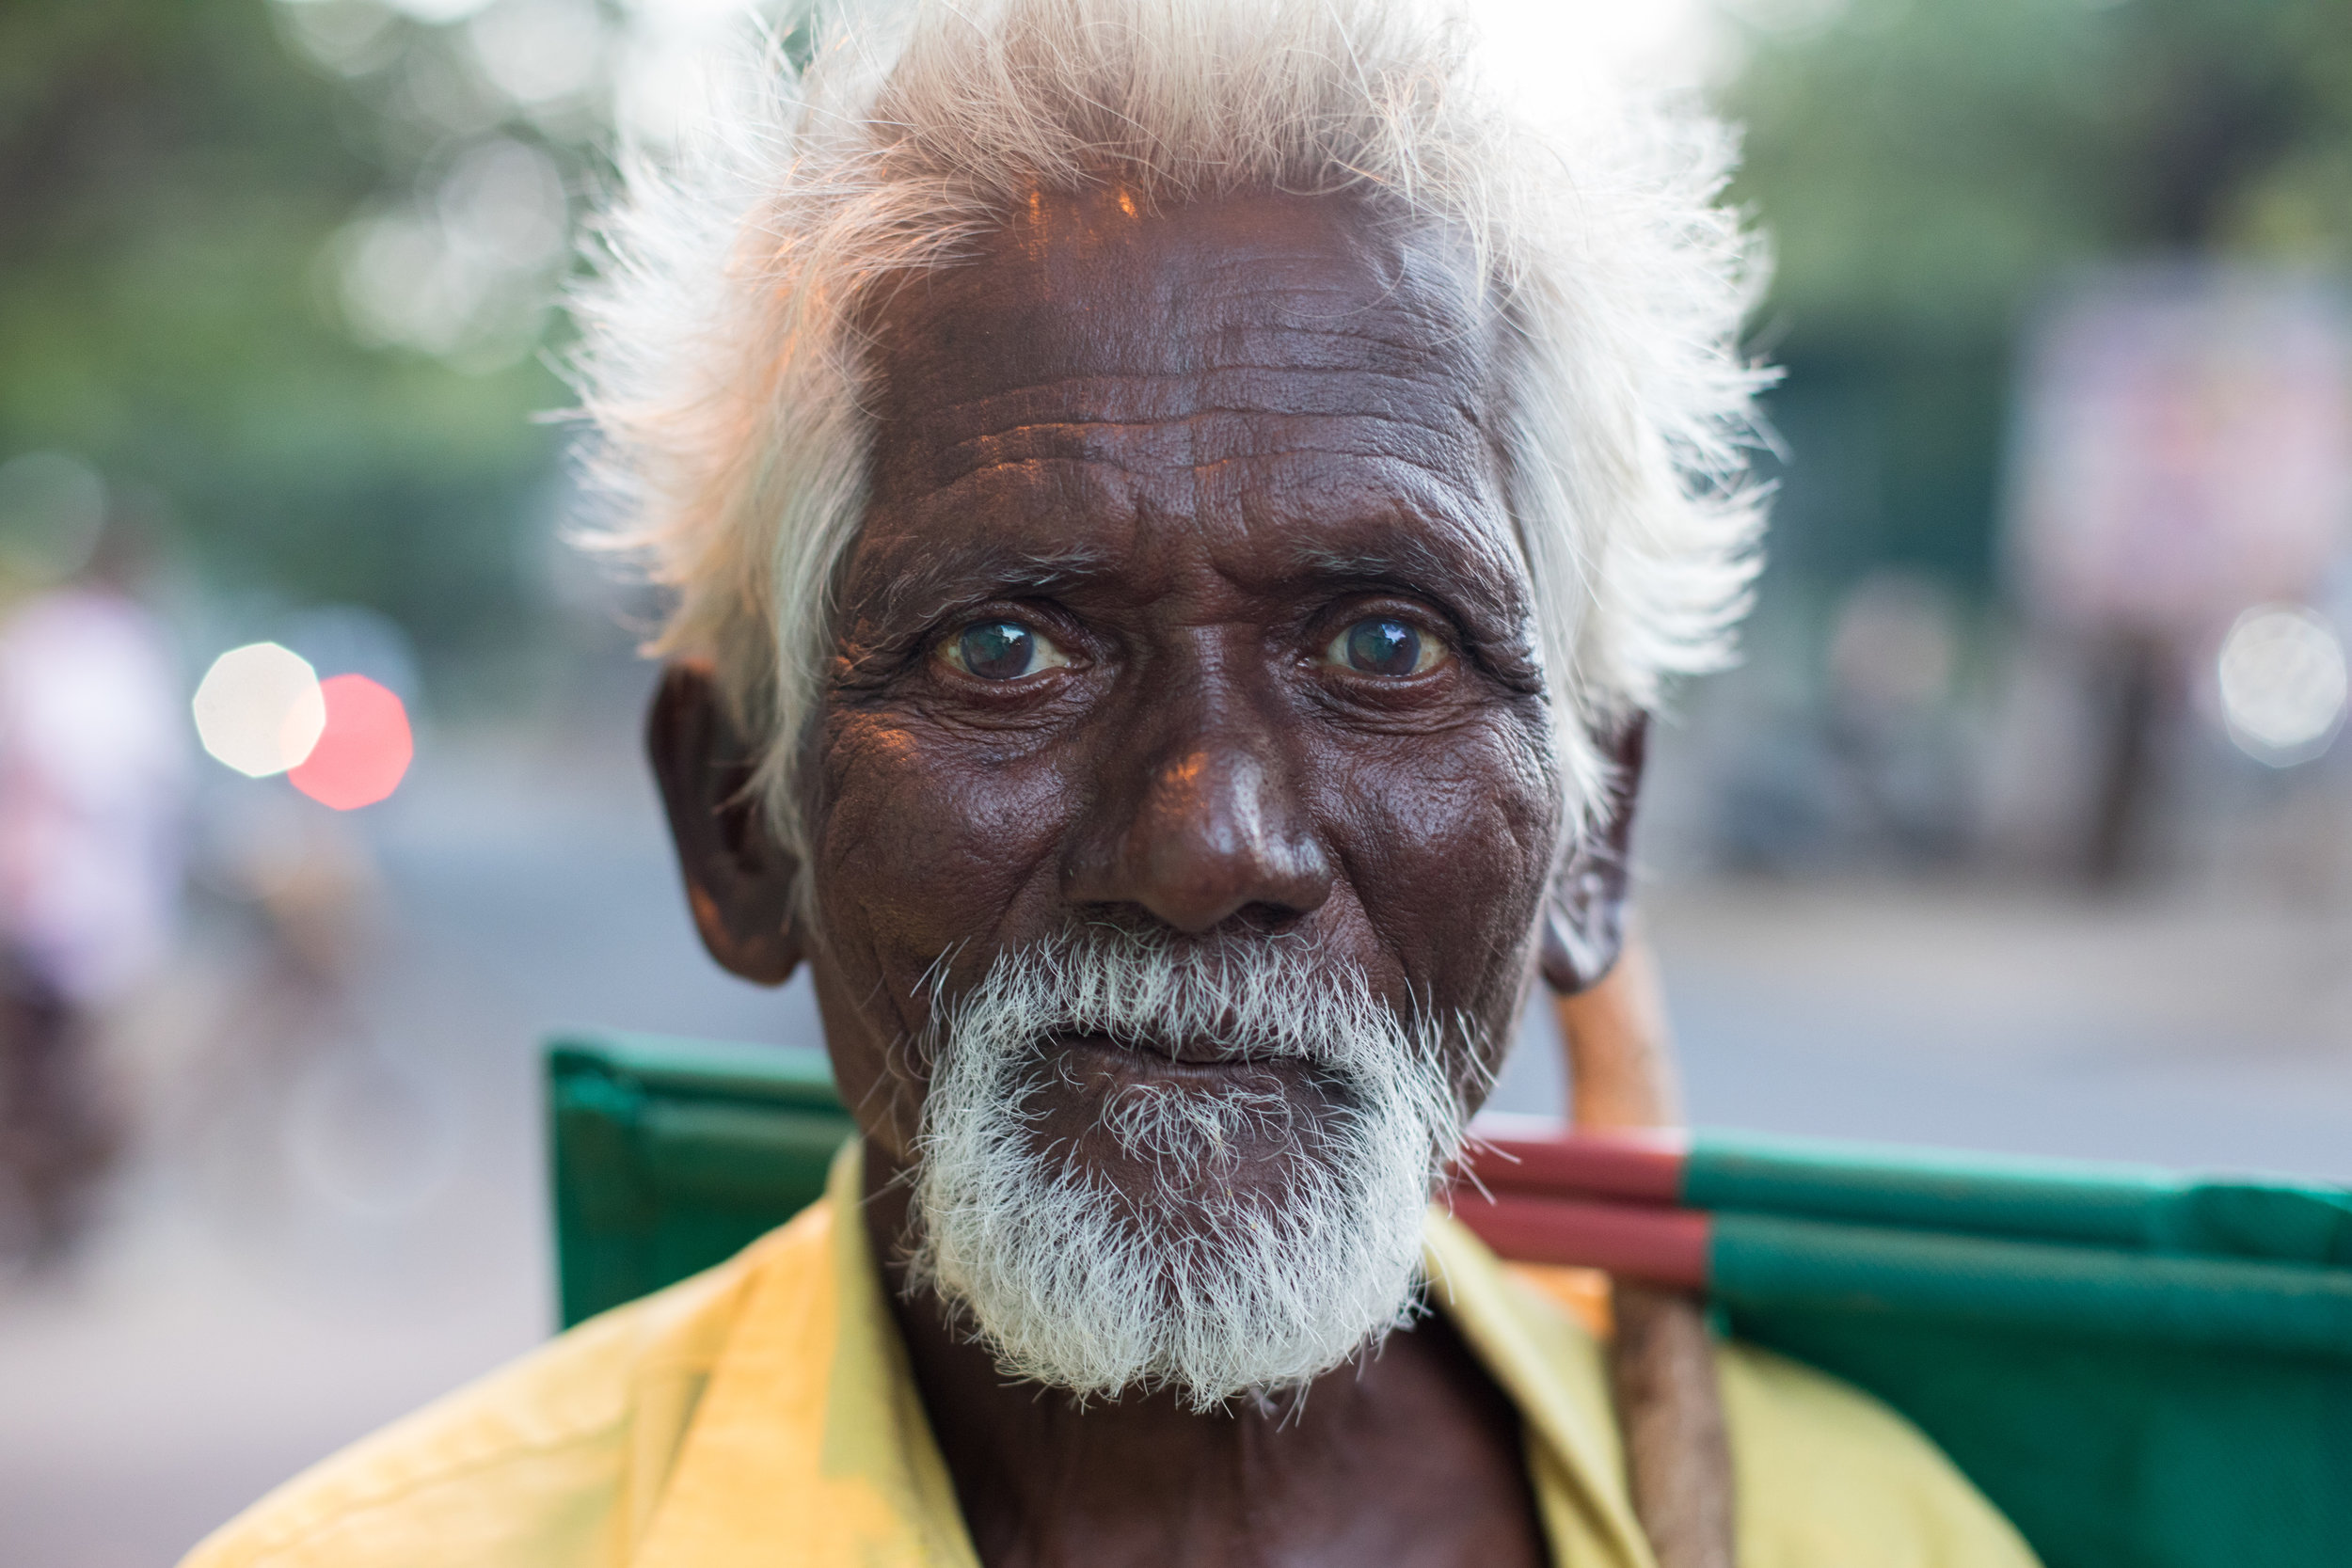 Street portrait of this drifter on the outskirts of Pondicherry in Tamil Nadu.